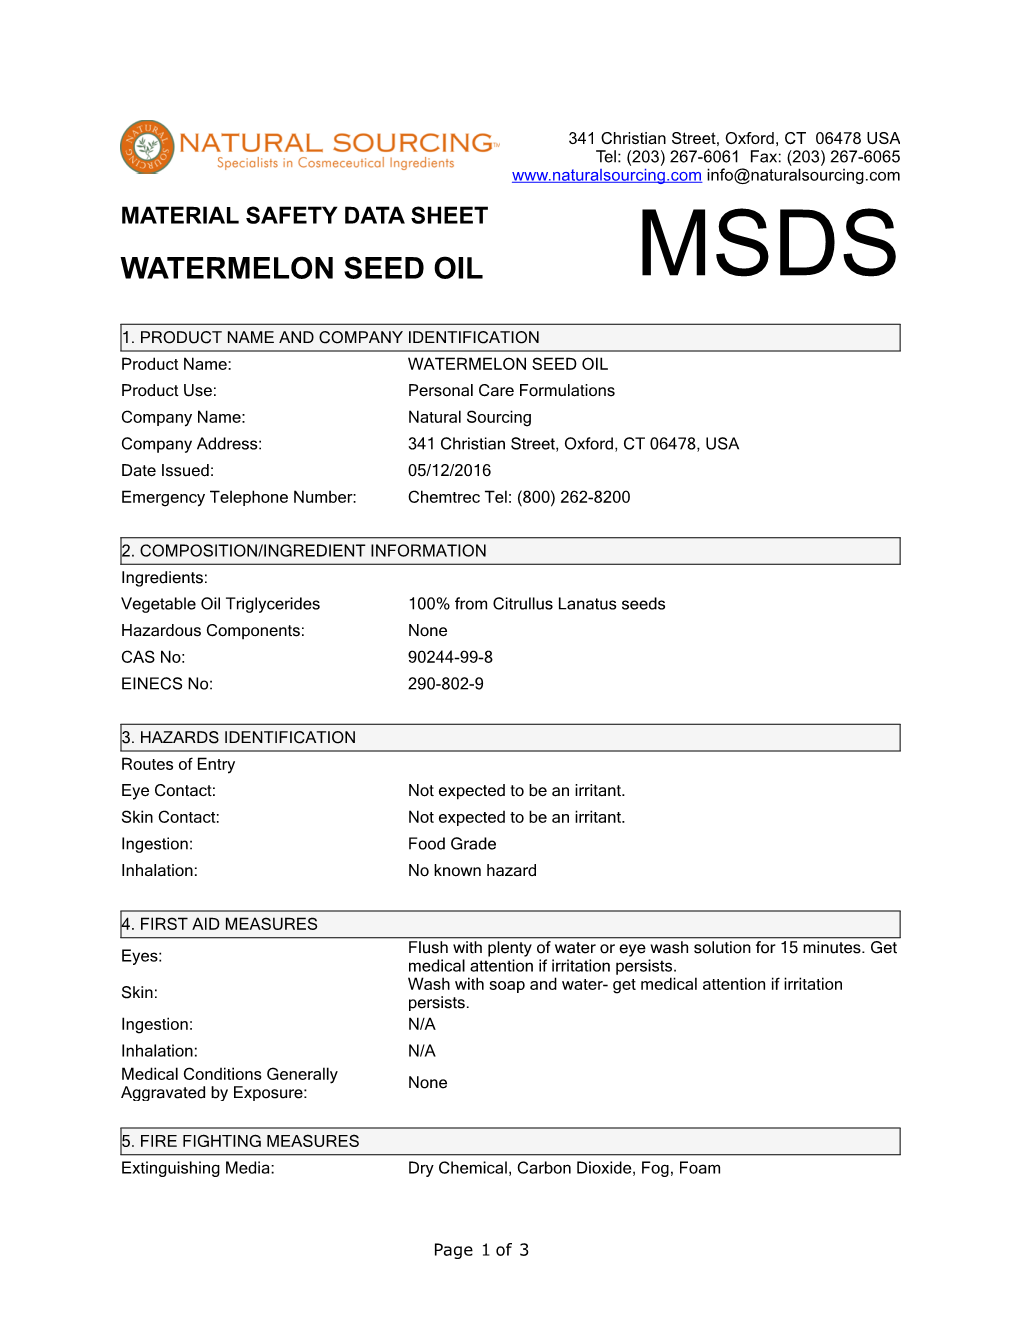 (MSDS) Watermelon Seed